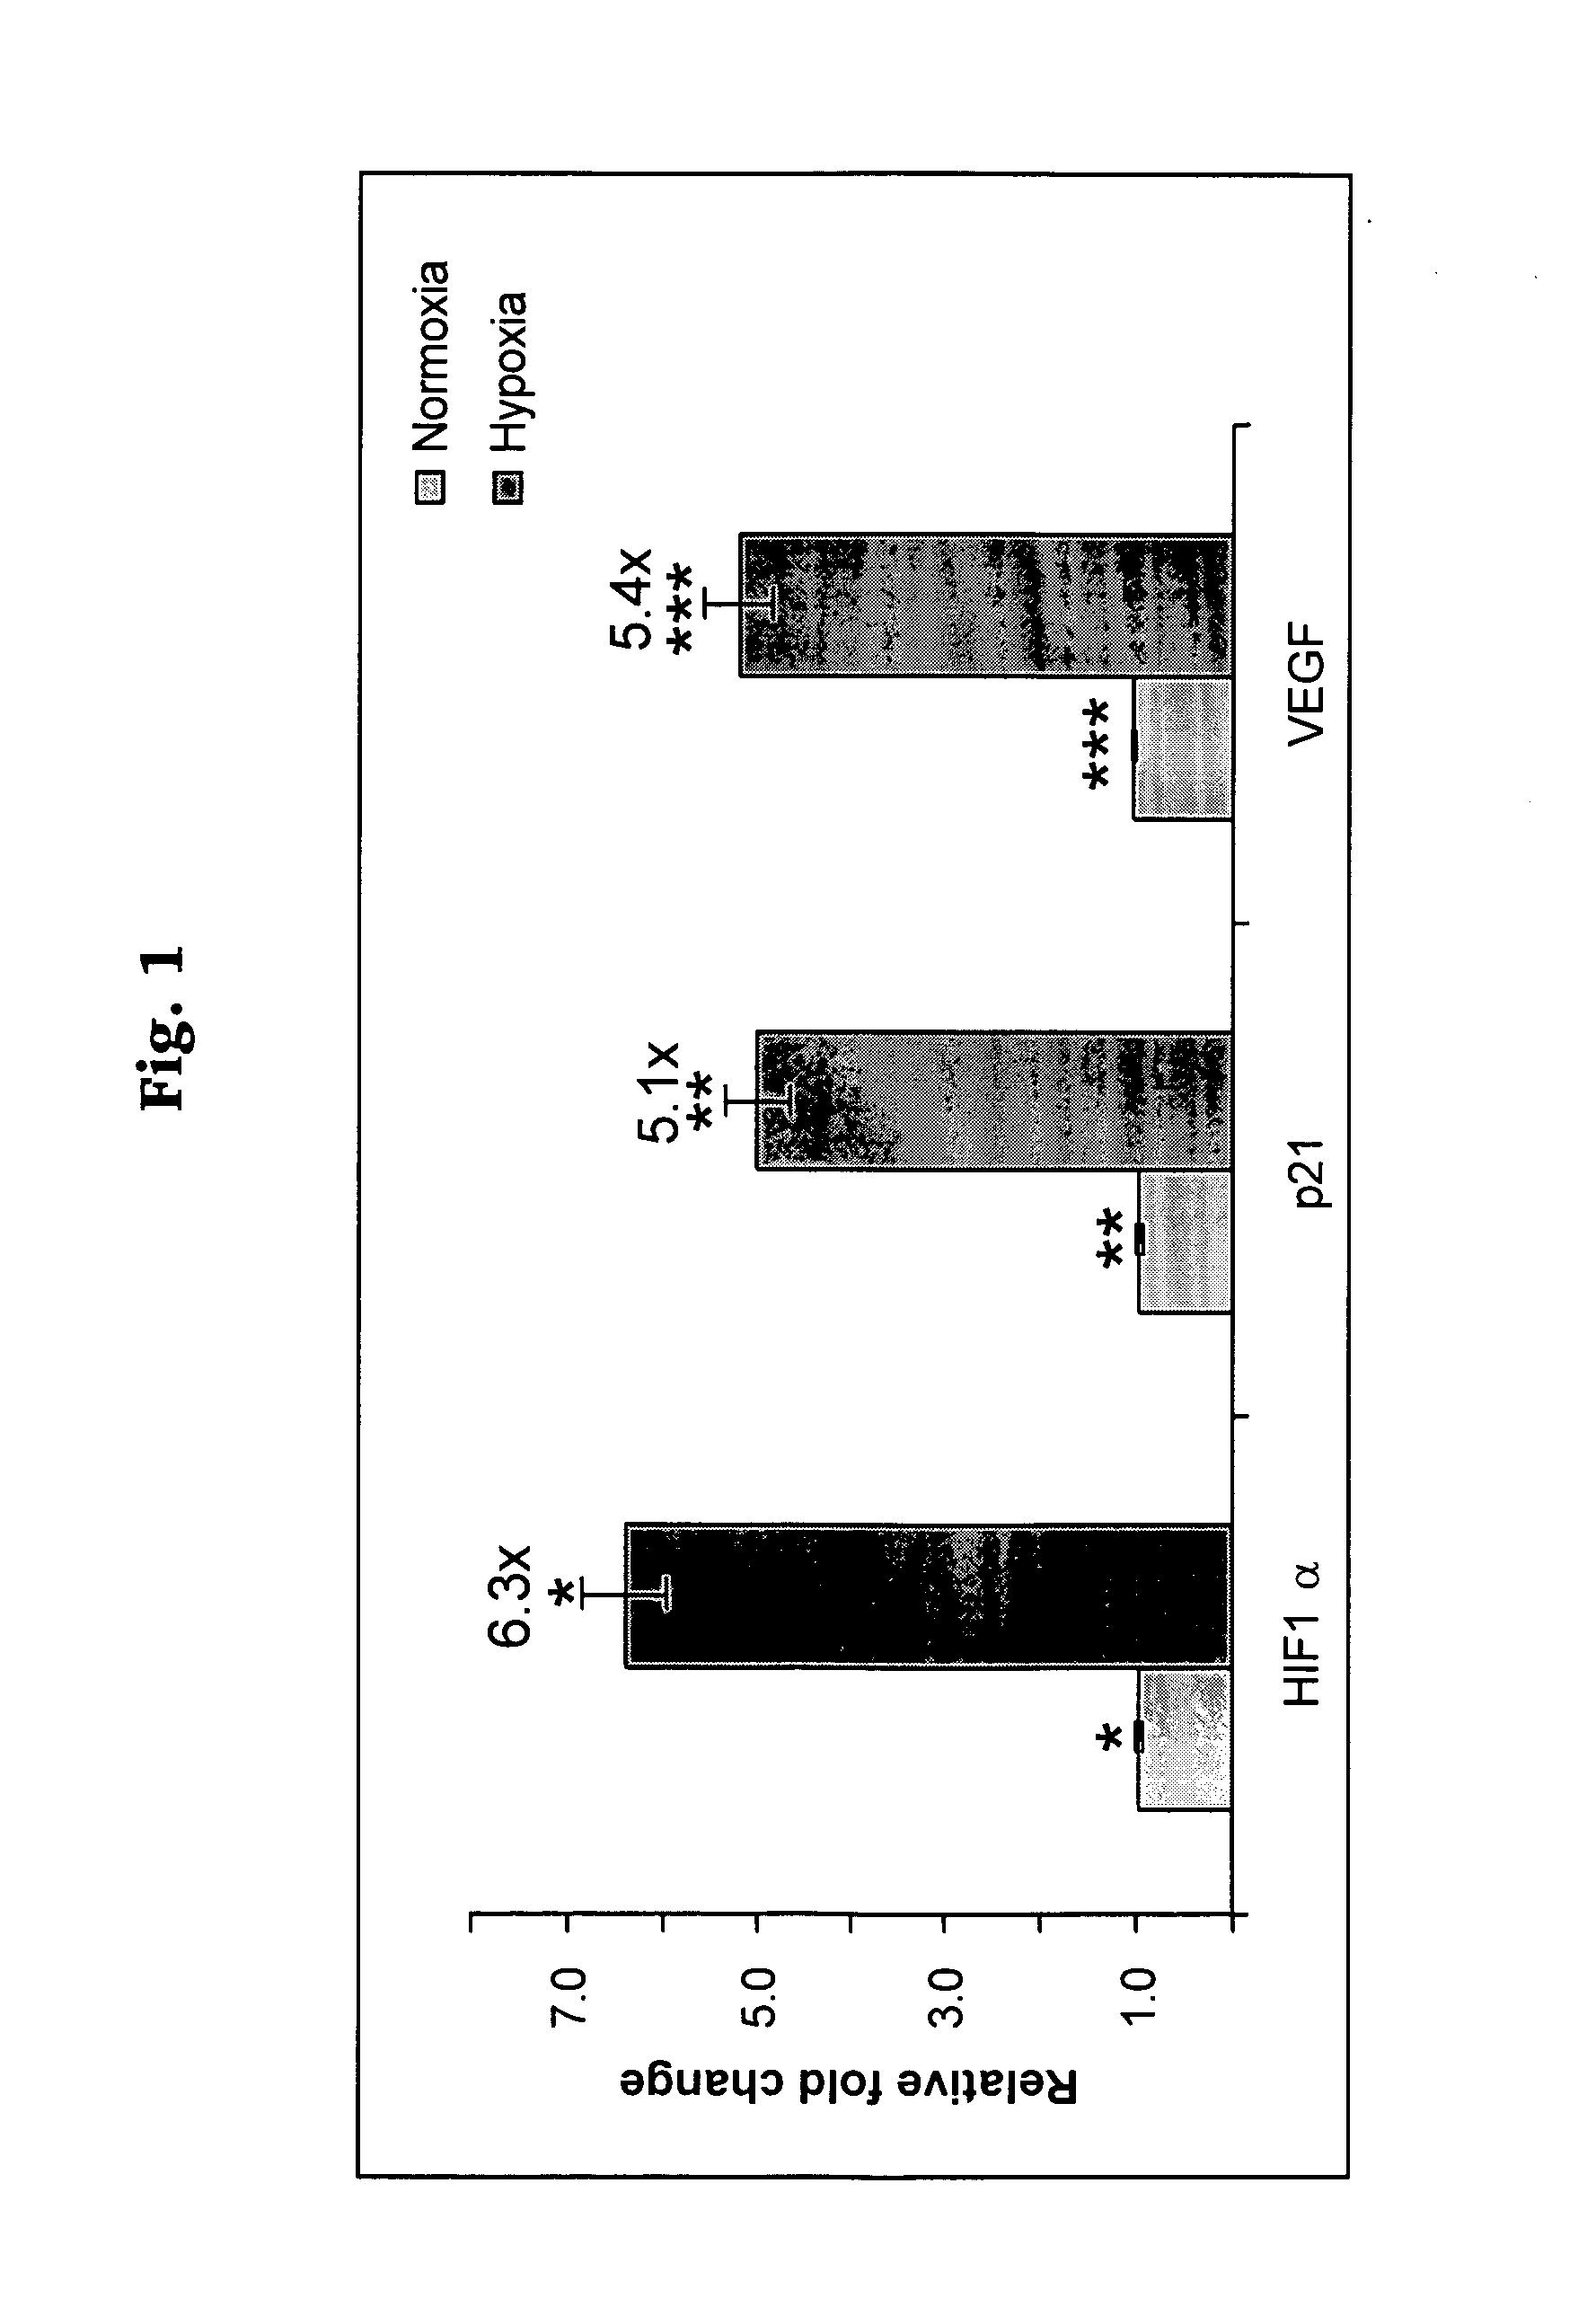 Hypoxia targeted compounds for cancer diagnosis and therapy